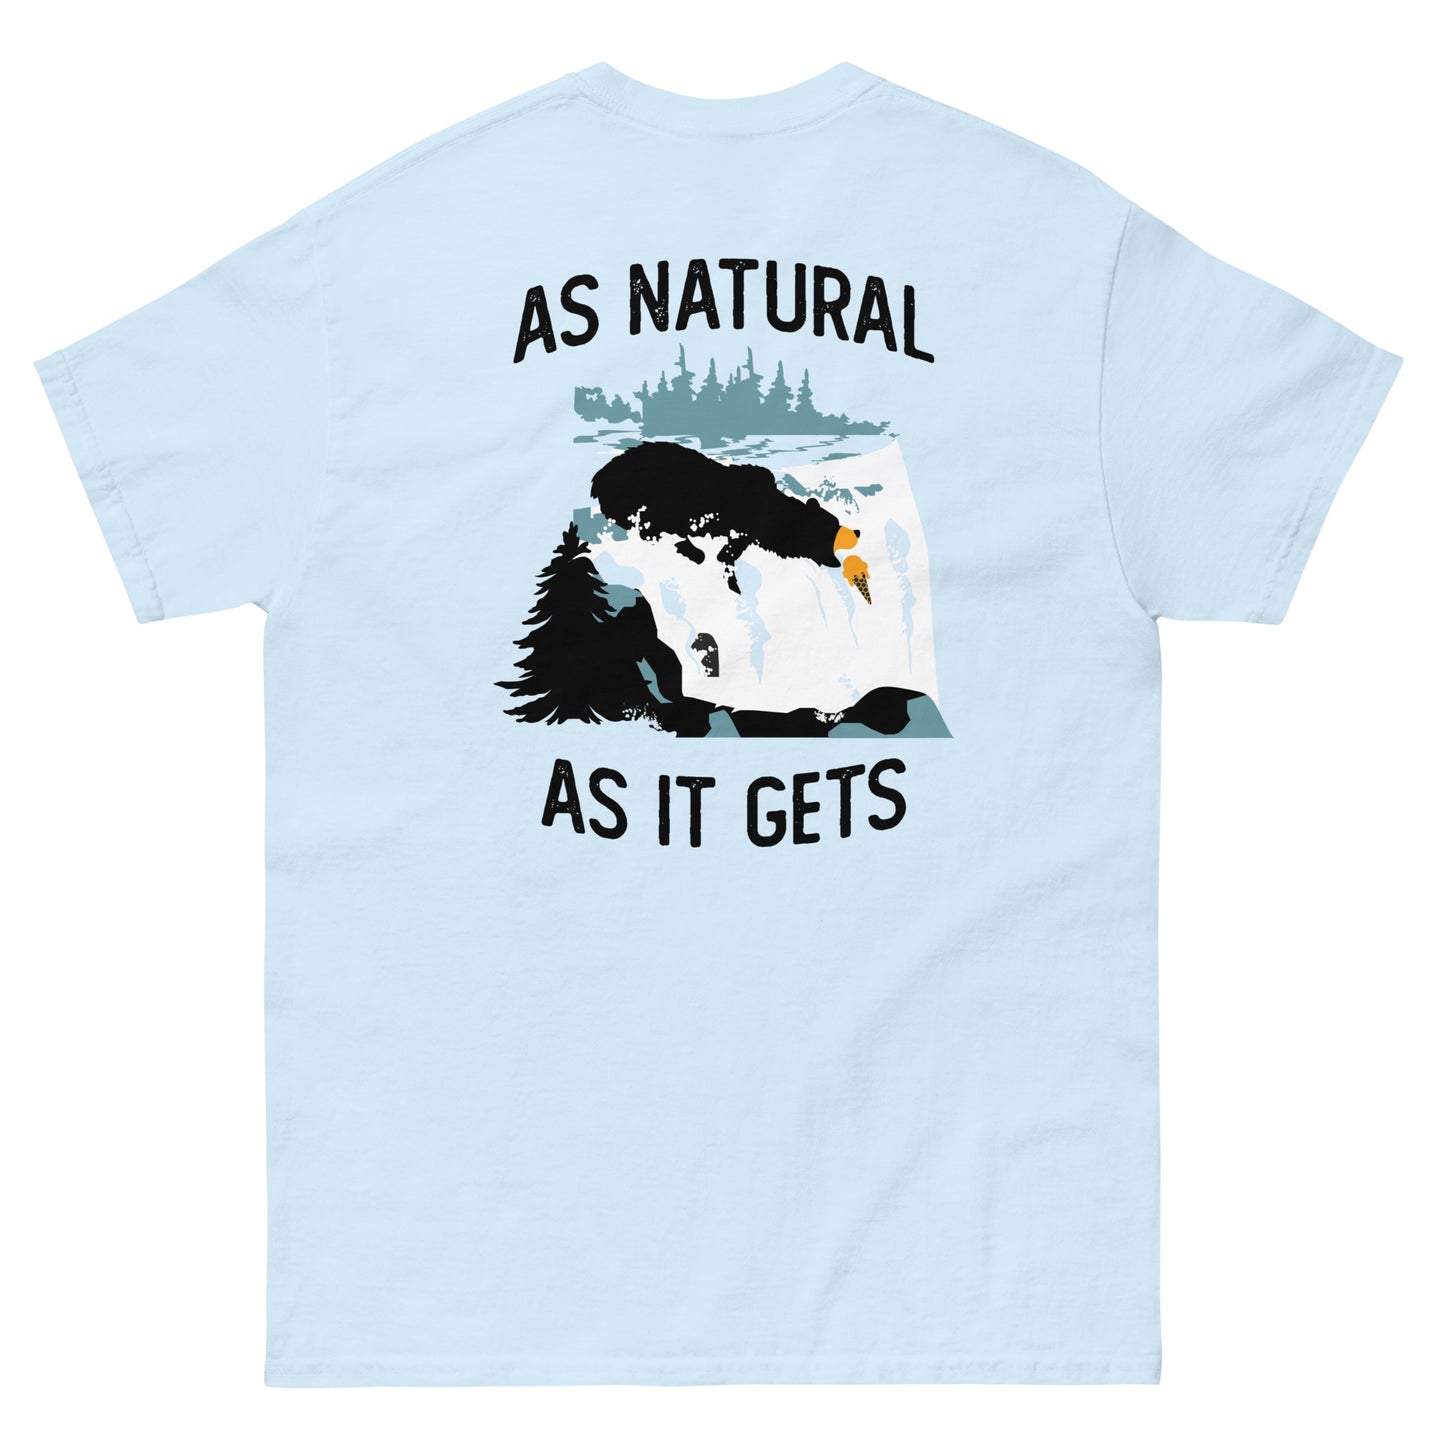 As Natural as it Gets Tee